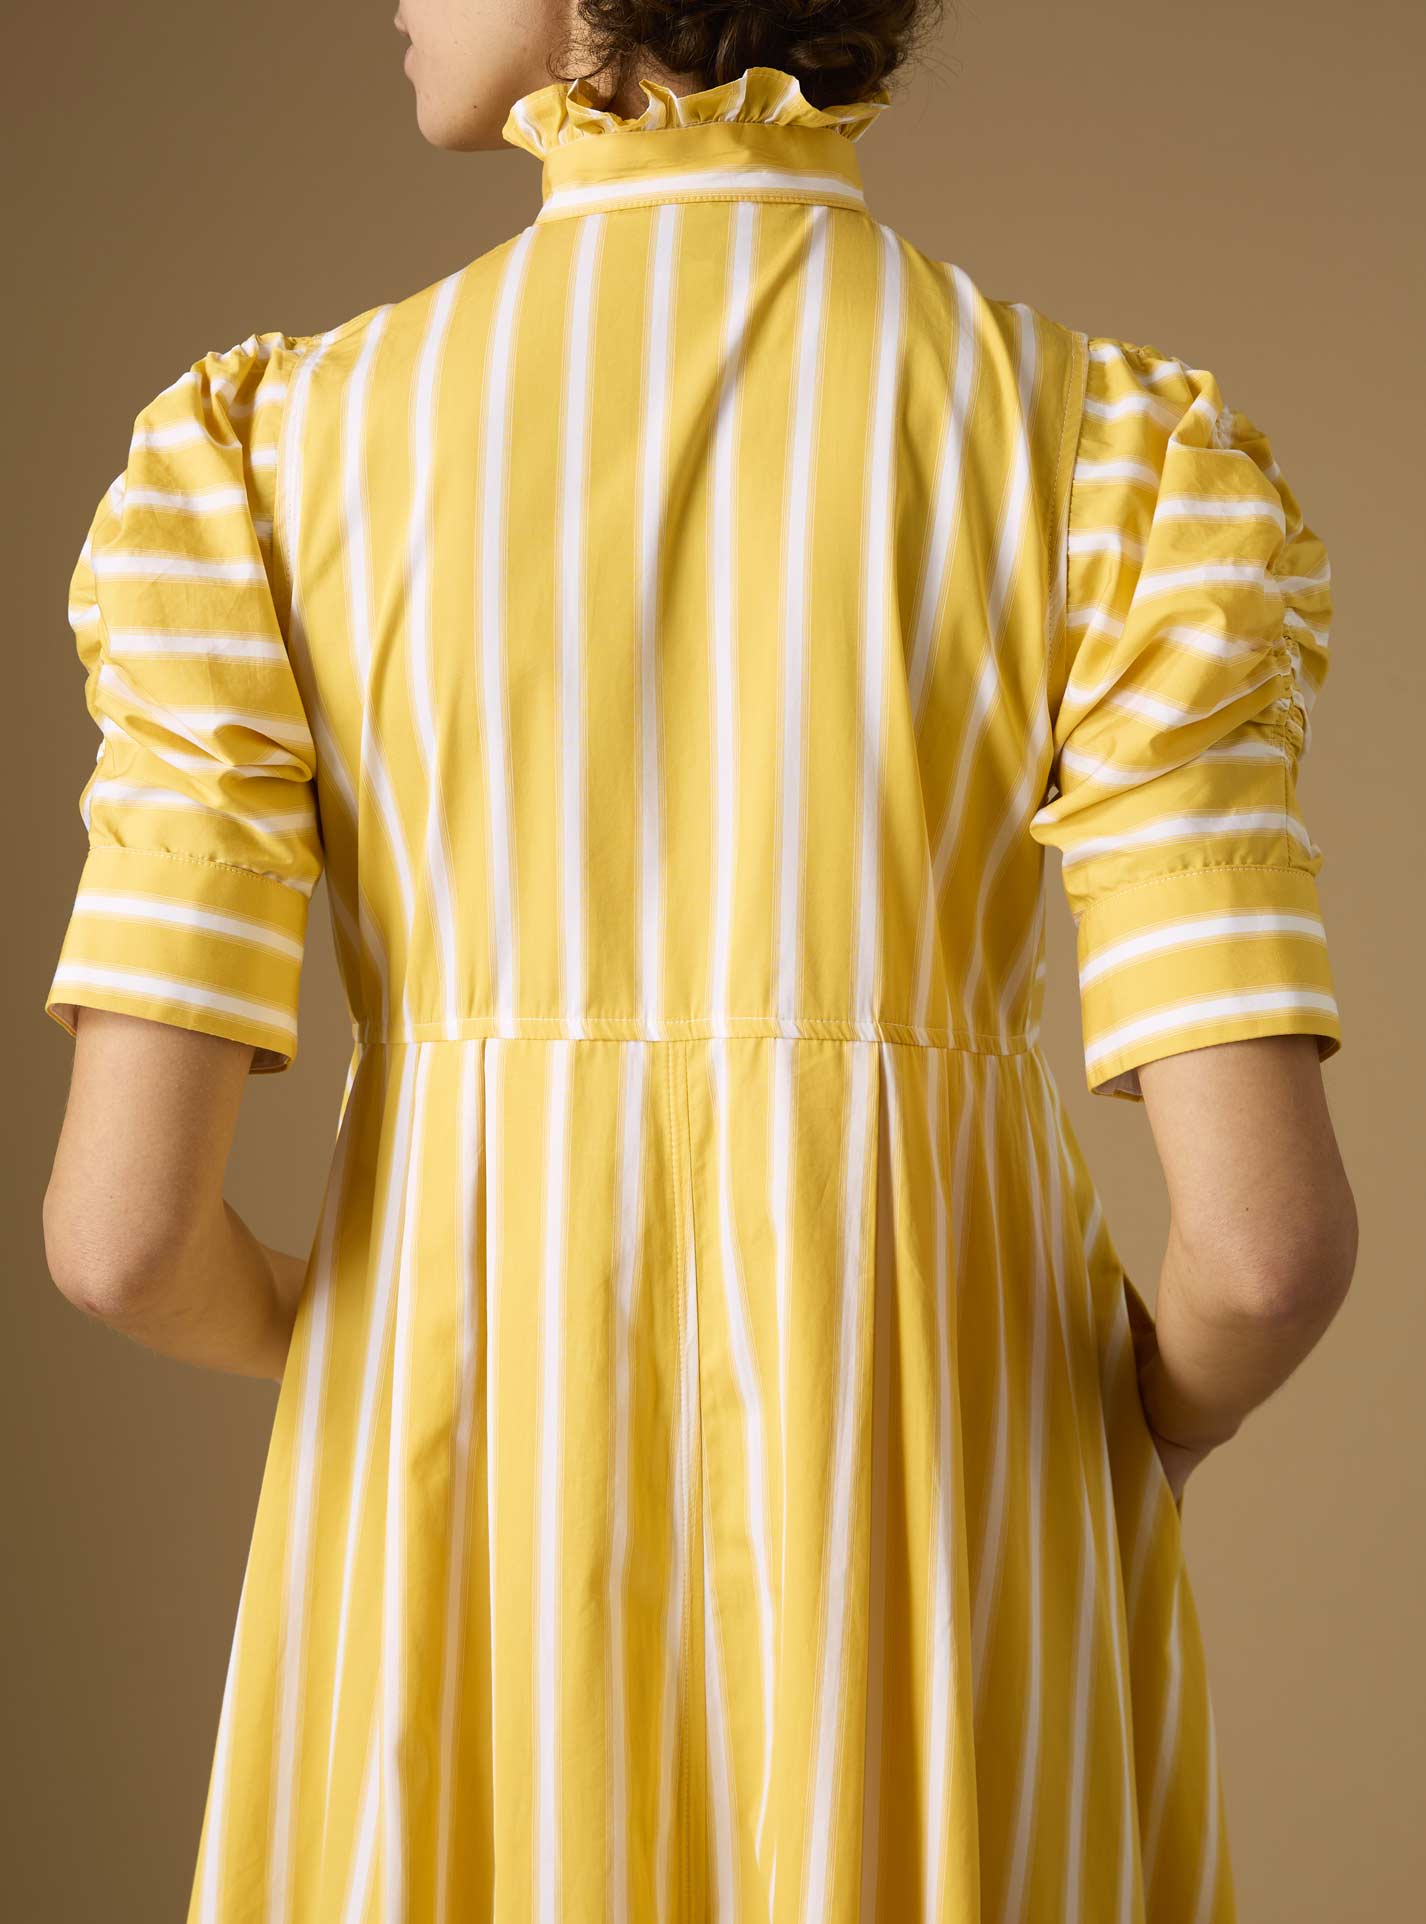 Back detail of Venetia Downing Poplin Yellow Dress by Thierry Colson